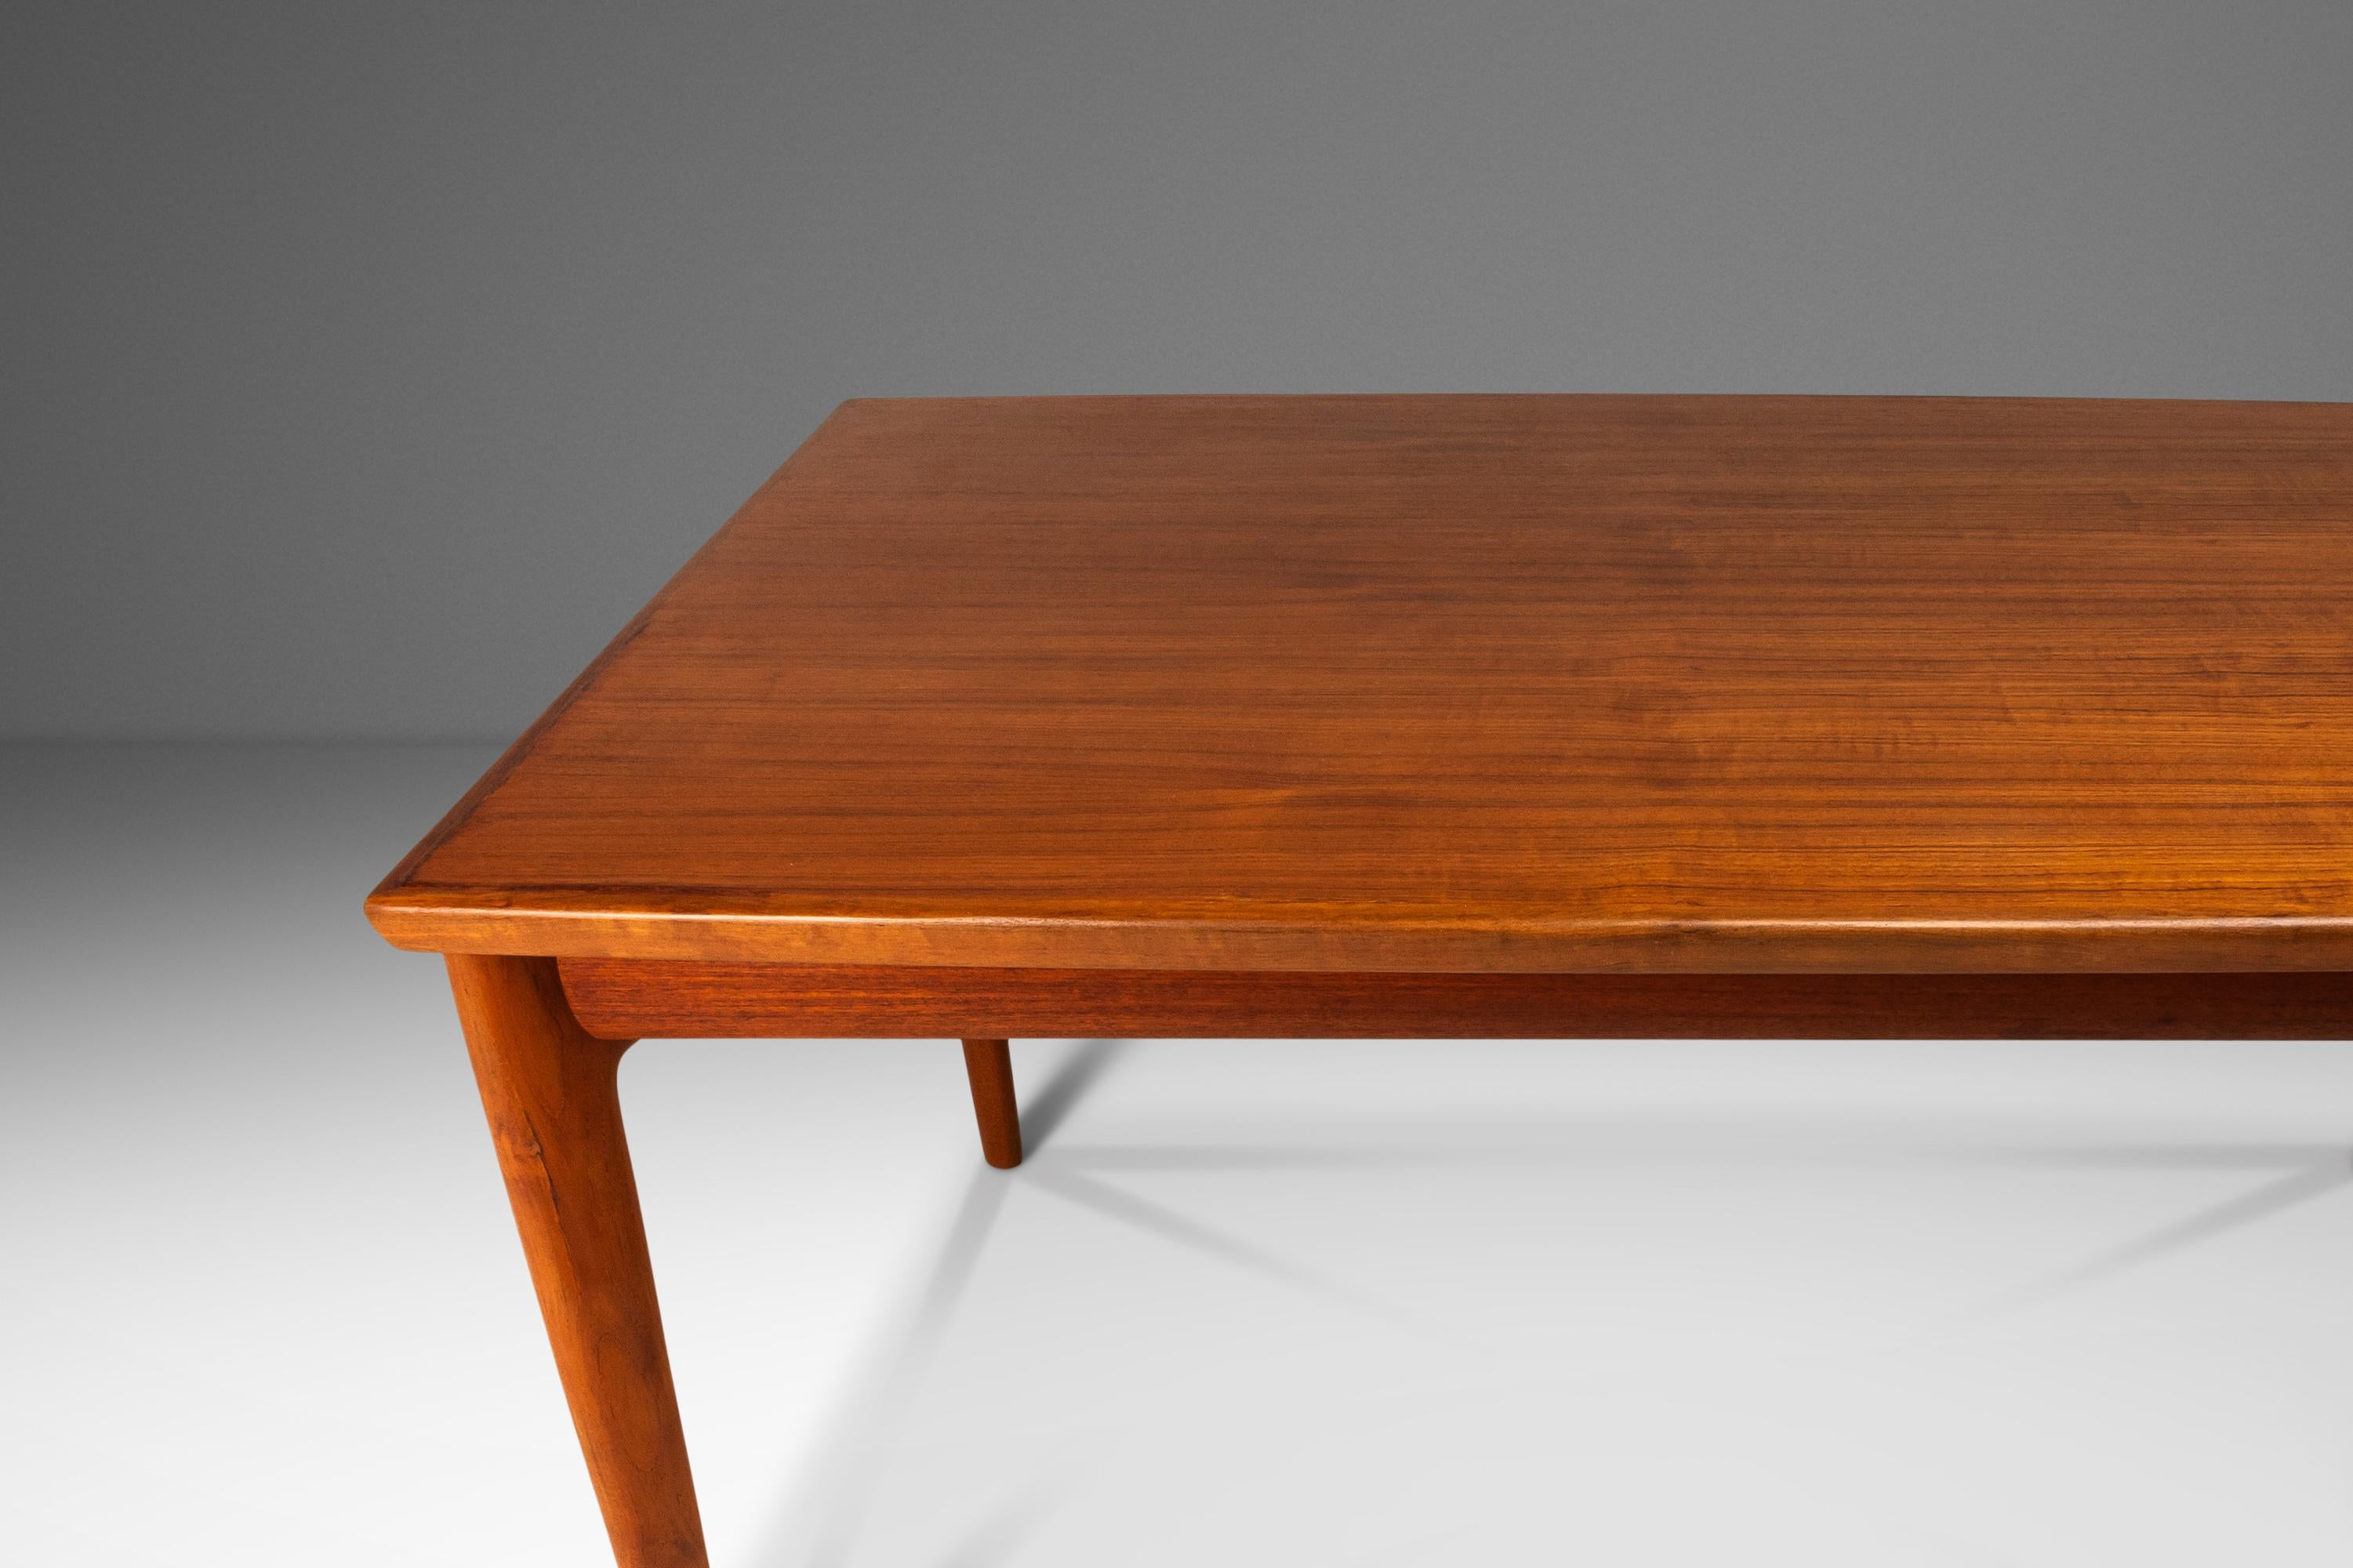 Danish Modern Expansion Dining Table in Teak w/ Stow-in-Table Leaves, c. 1960s For Sale 11